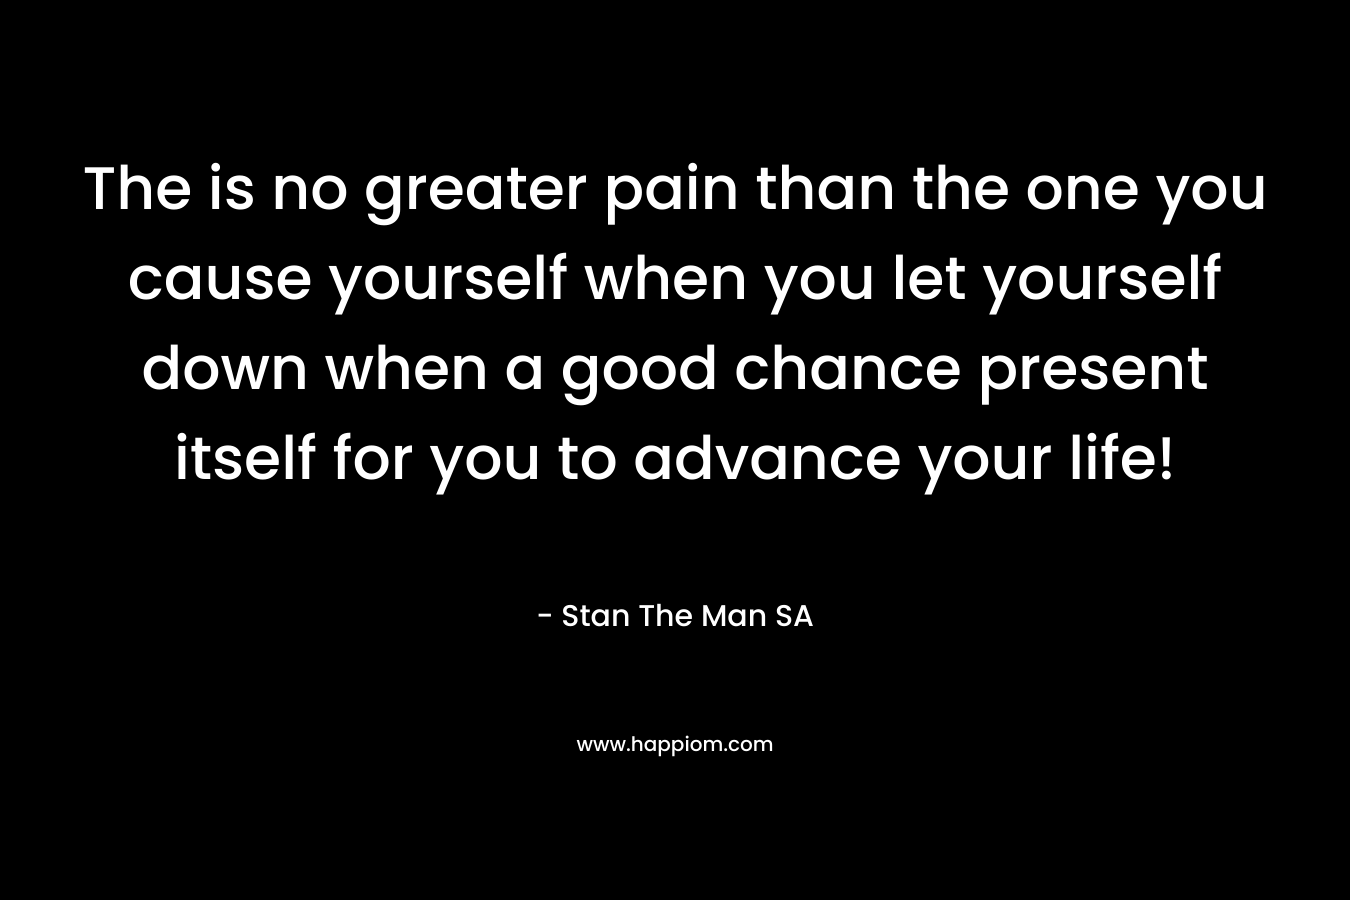 The is no greater pain than the one you cause yourself when you let yourself down when a good chance present itself for you to advance your life!